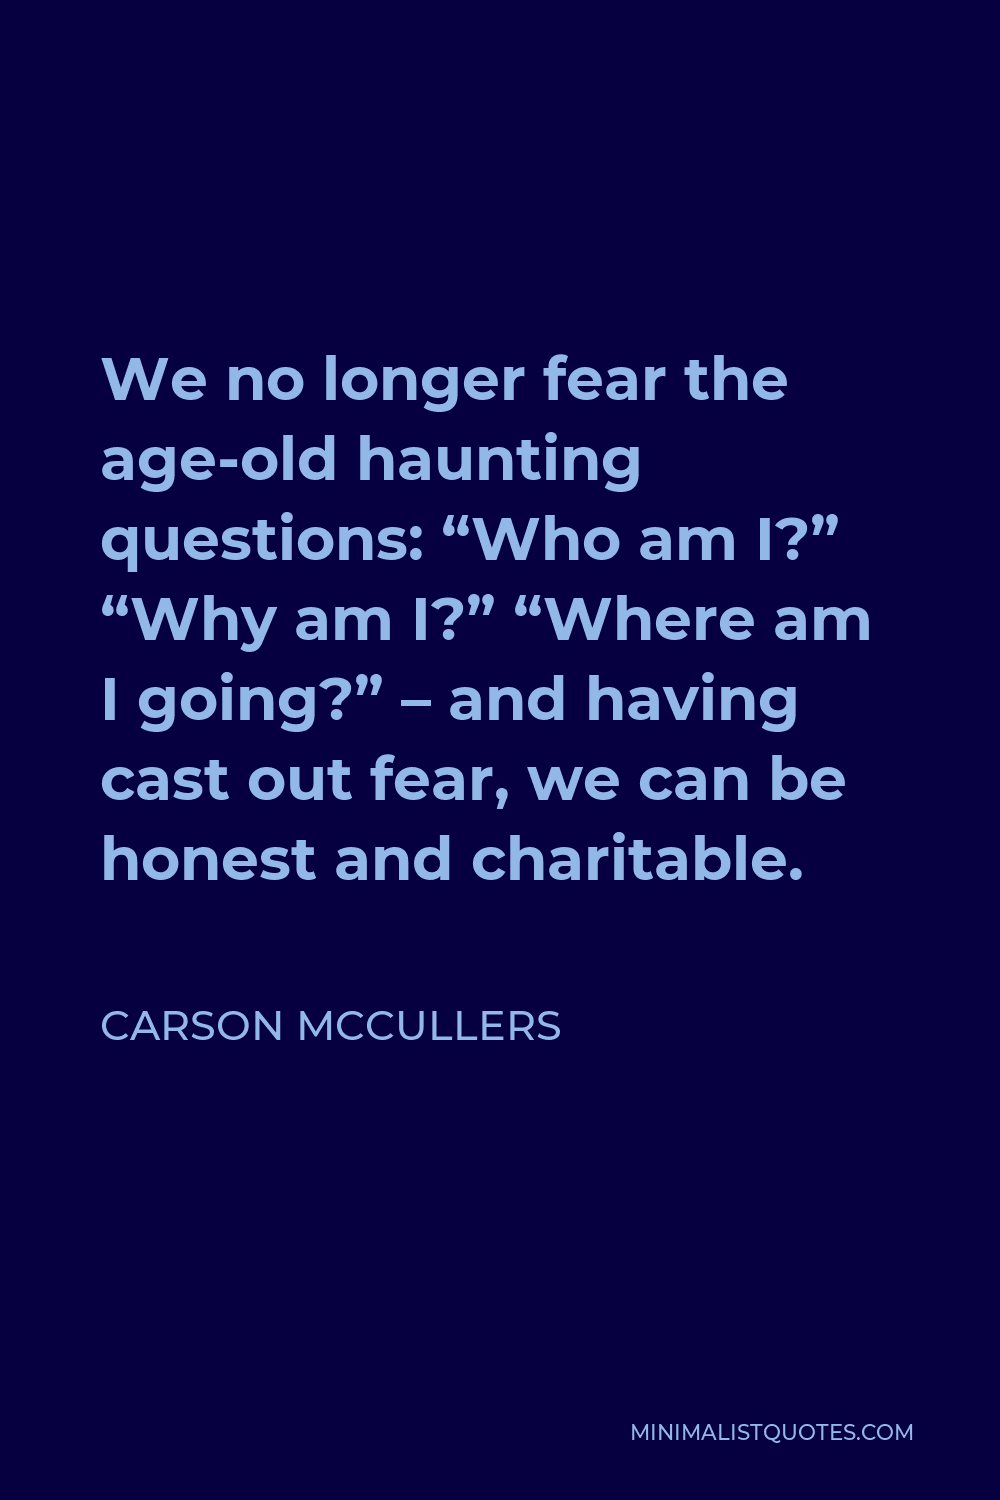 Carson McCullers Quote - We no longer fear the age-old haunting questions: “Who am I?” “Why am I?” “Where am I going?” – and having cast out fear, we can be honest and charitable.